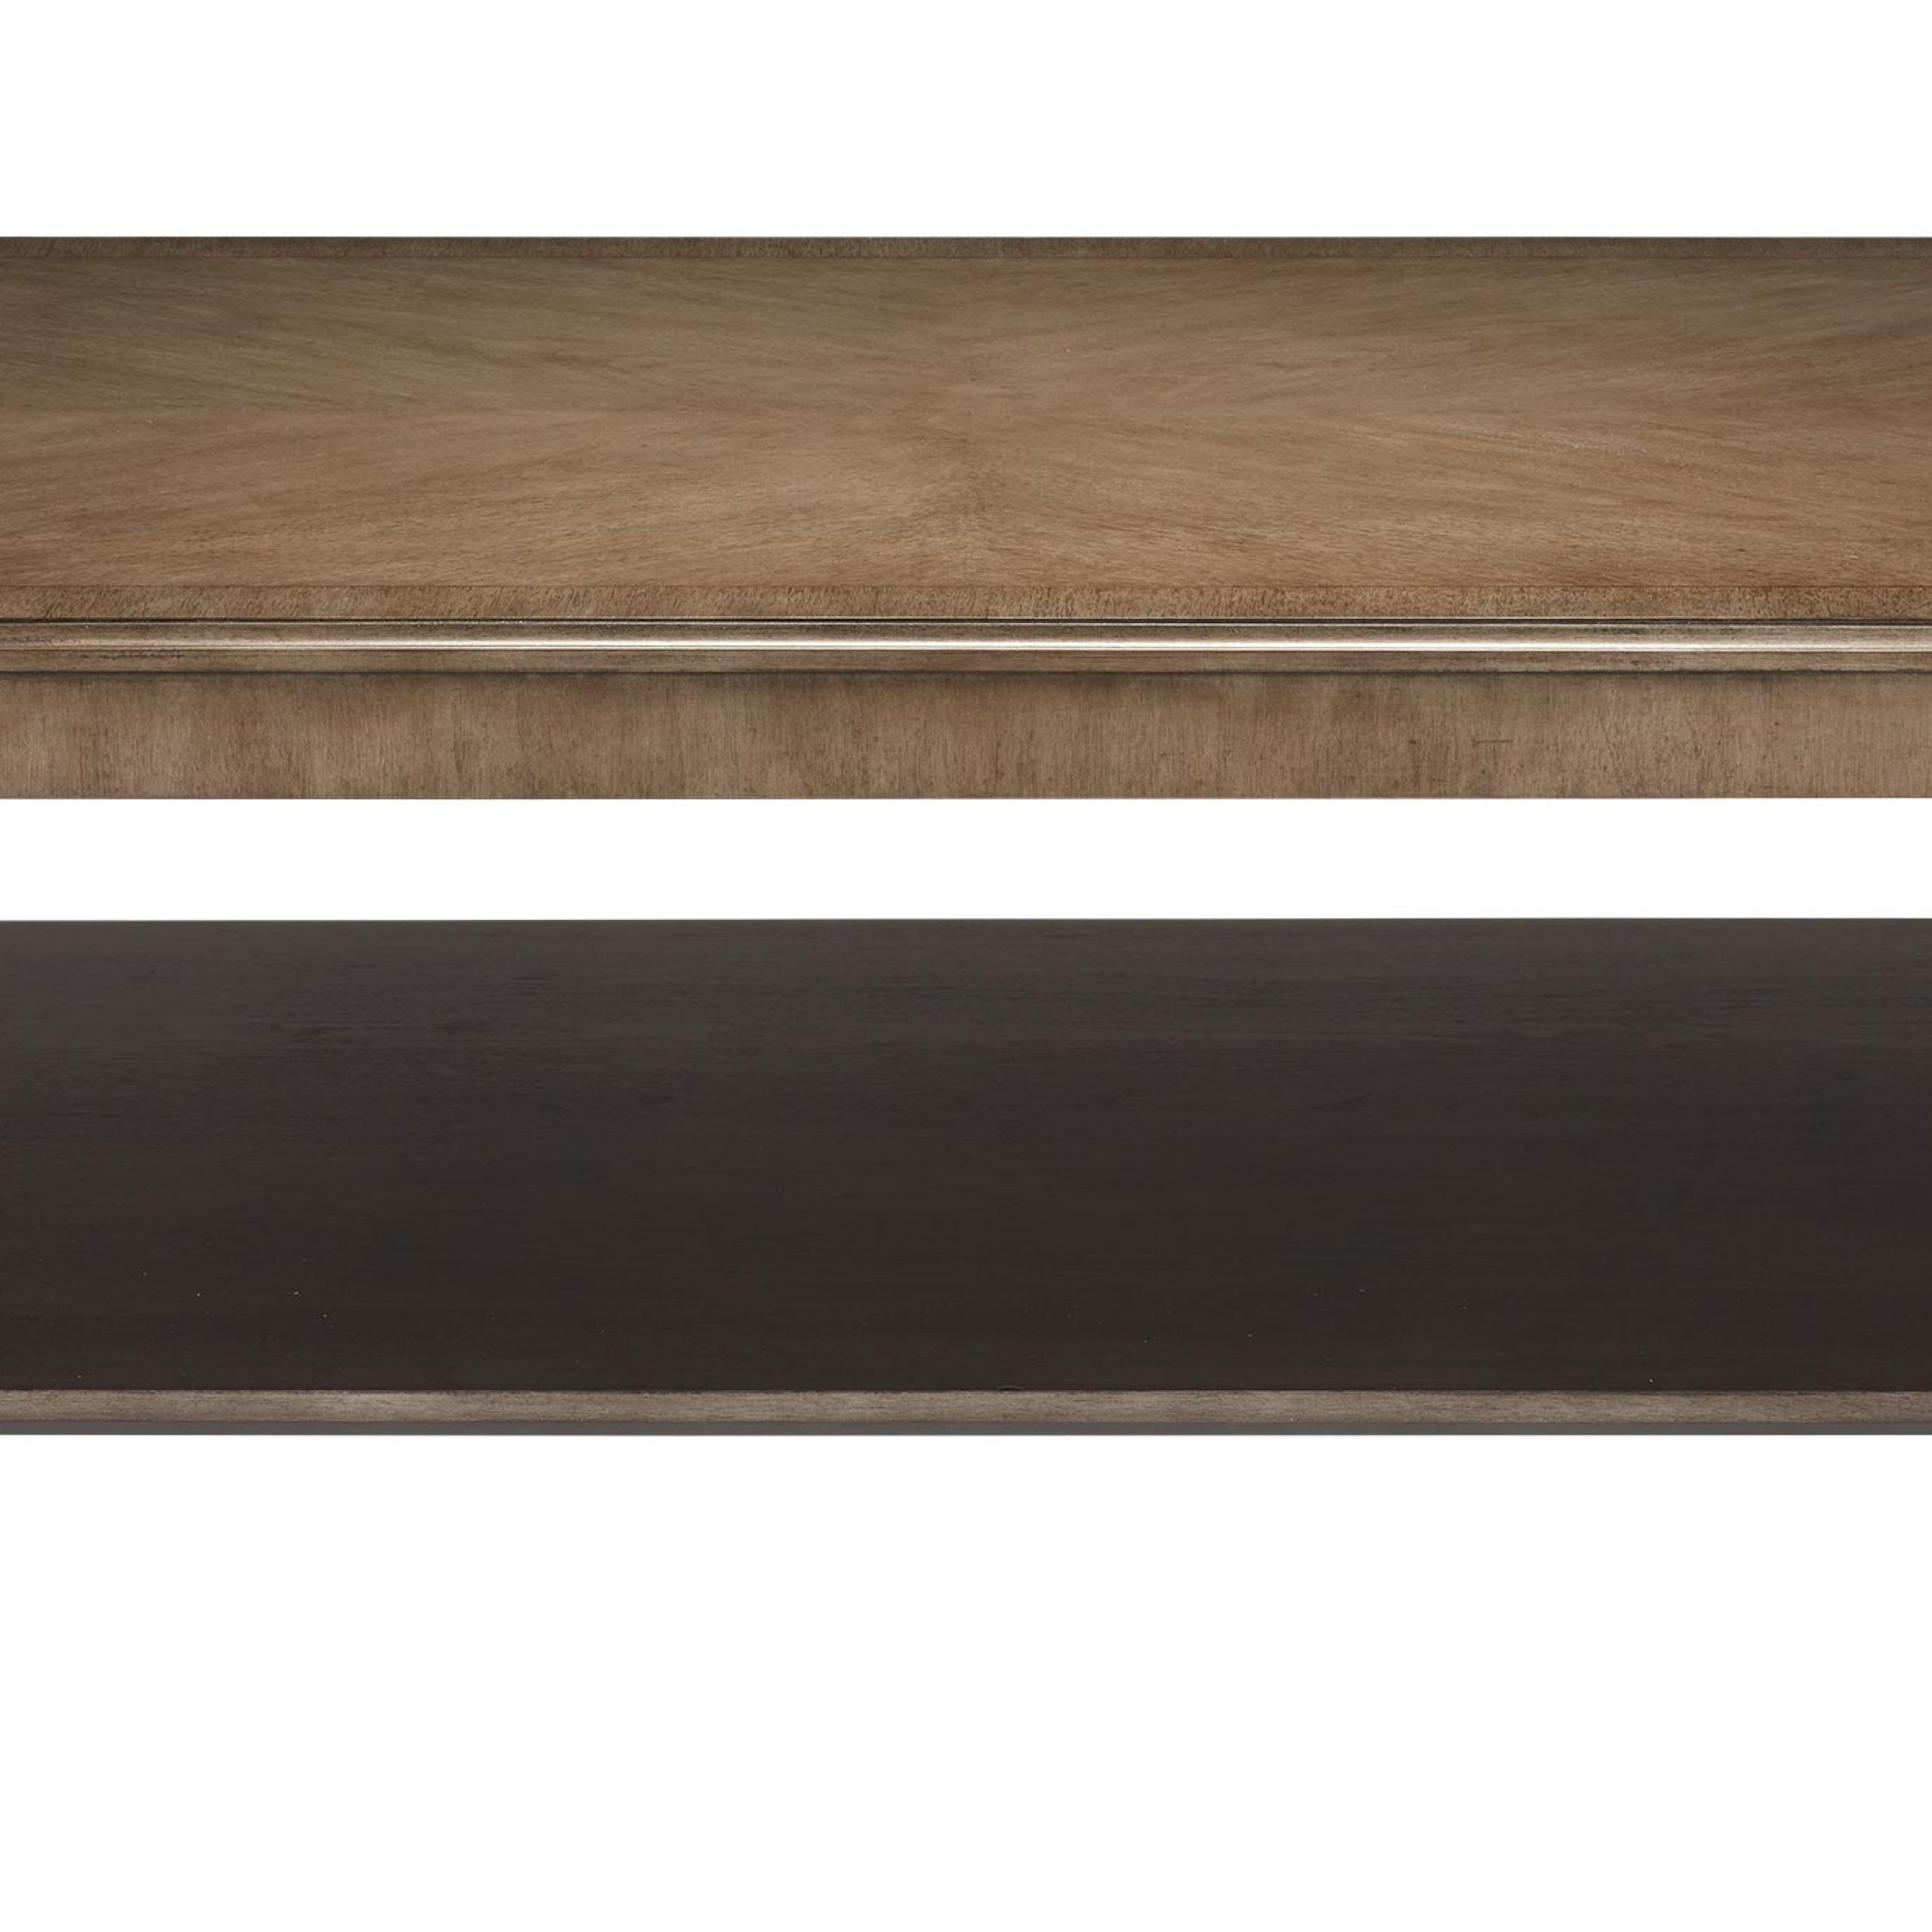 Elton Rectangular Coffee Table | Wood Coffee Table | Ethan Allen With Rectangle Coffee Tables (View 6 of 15)